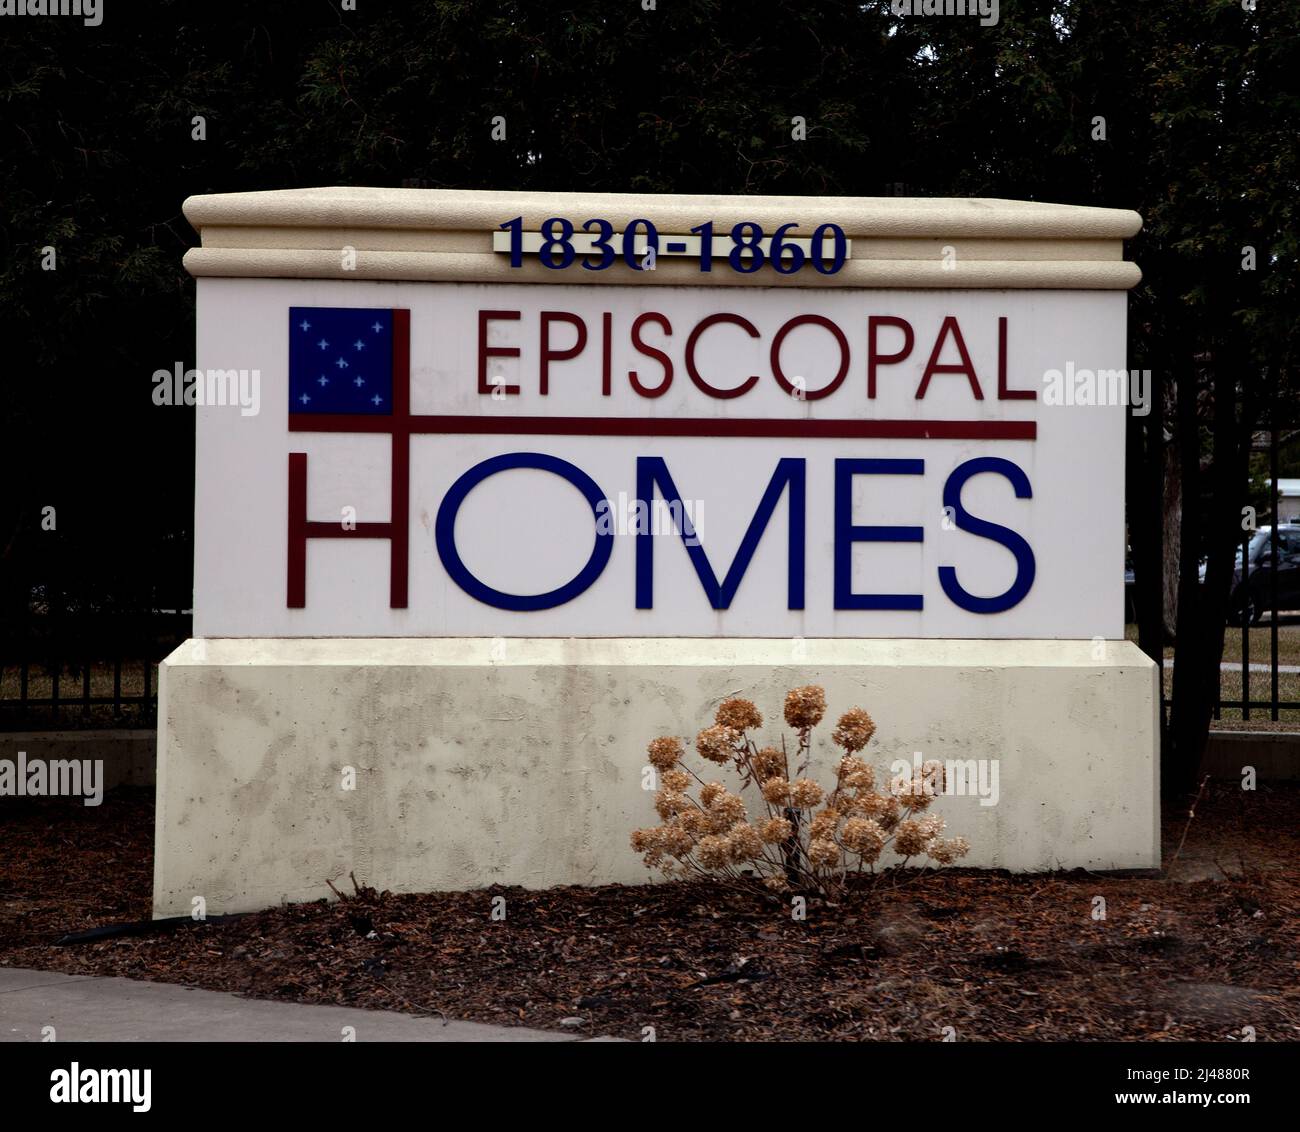 Sign for Episcopal Homes a place for senior living allowing for several levels of independence. St Paul Minnesota MN USA Stock Photo